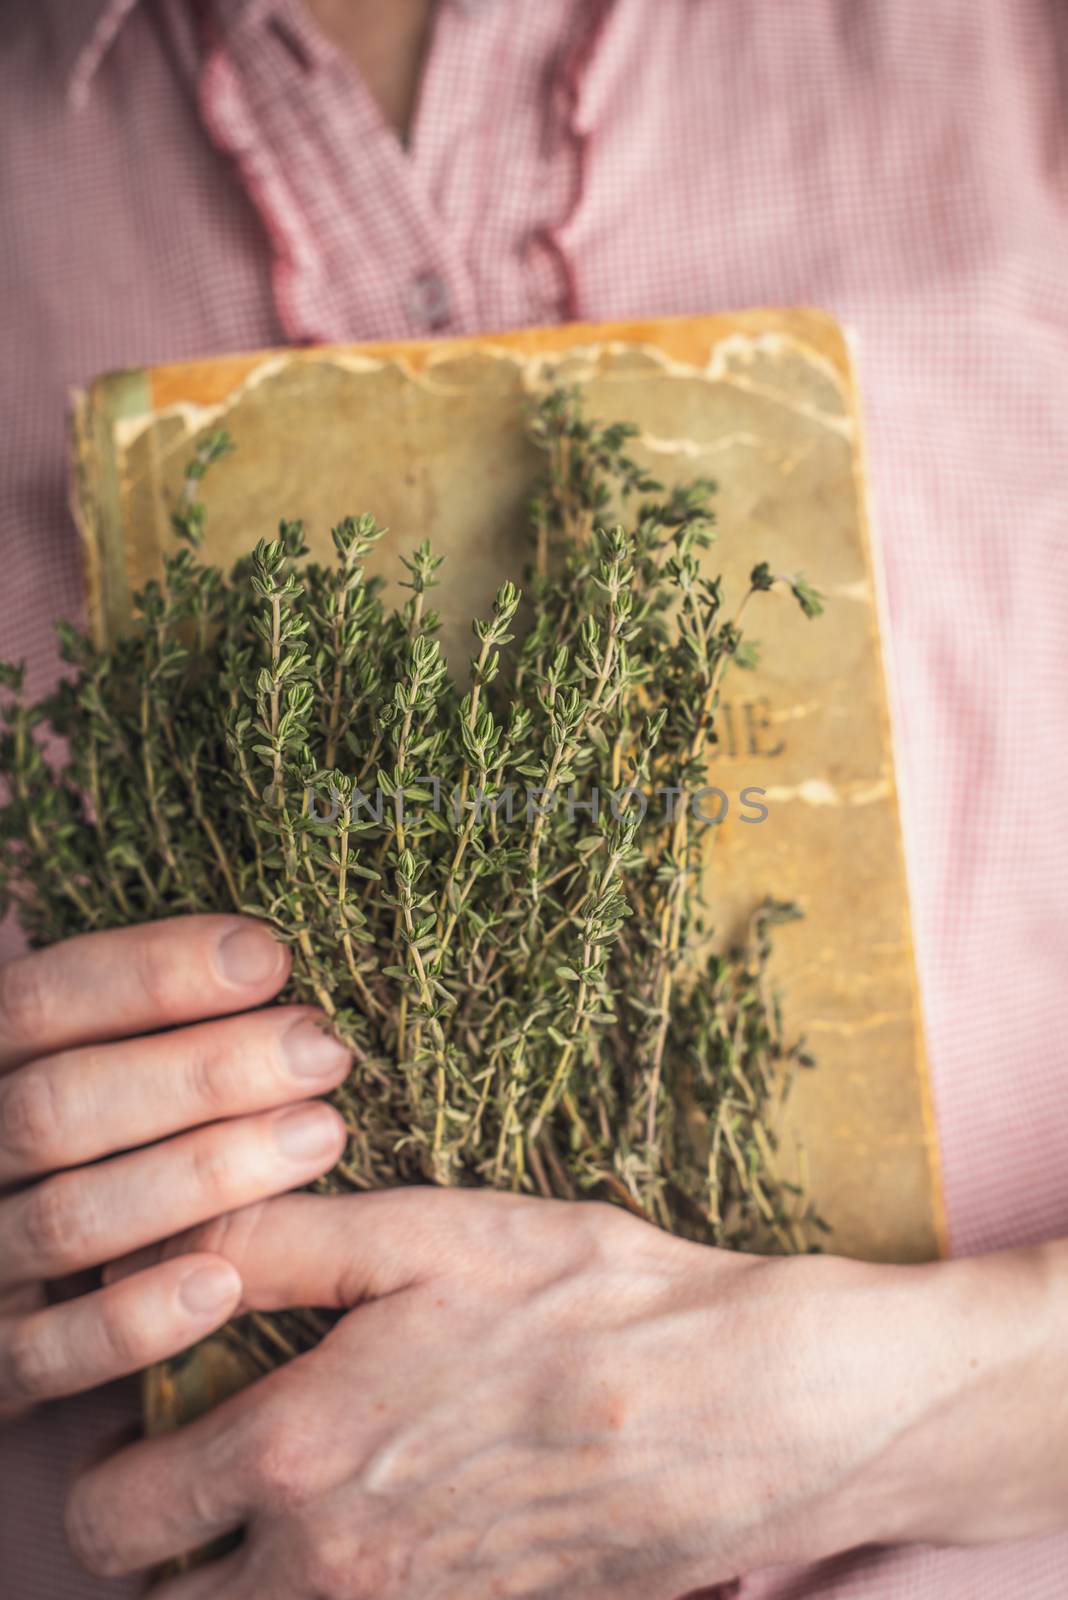 Woman holding old recipe book and herbs